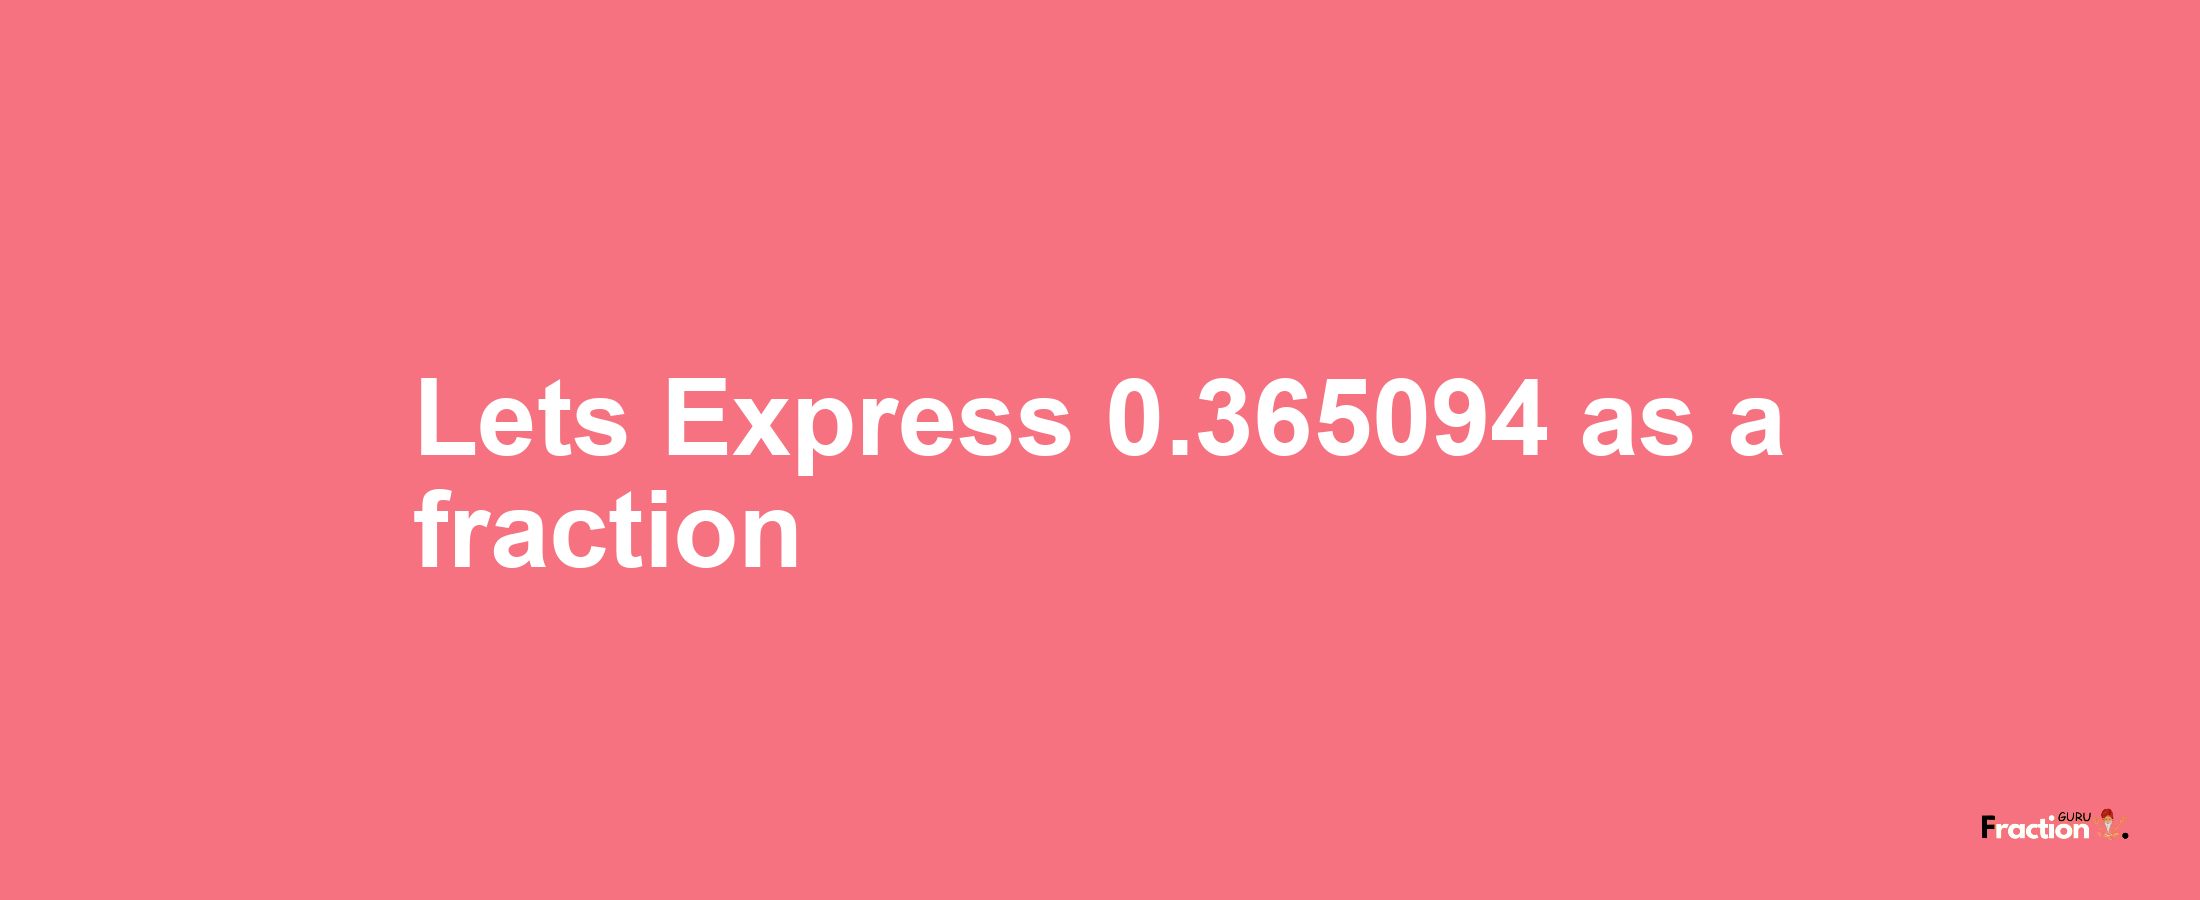 Lets Express 0.365094 as afraction